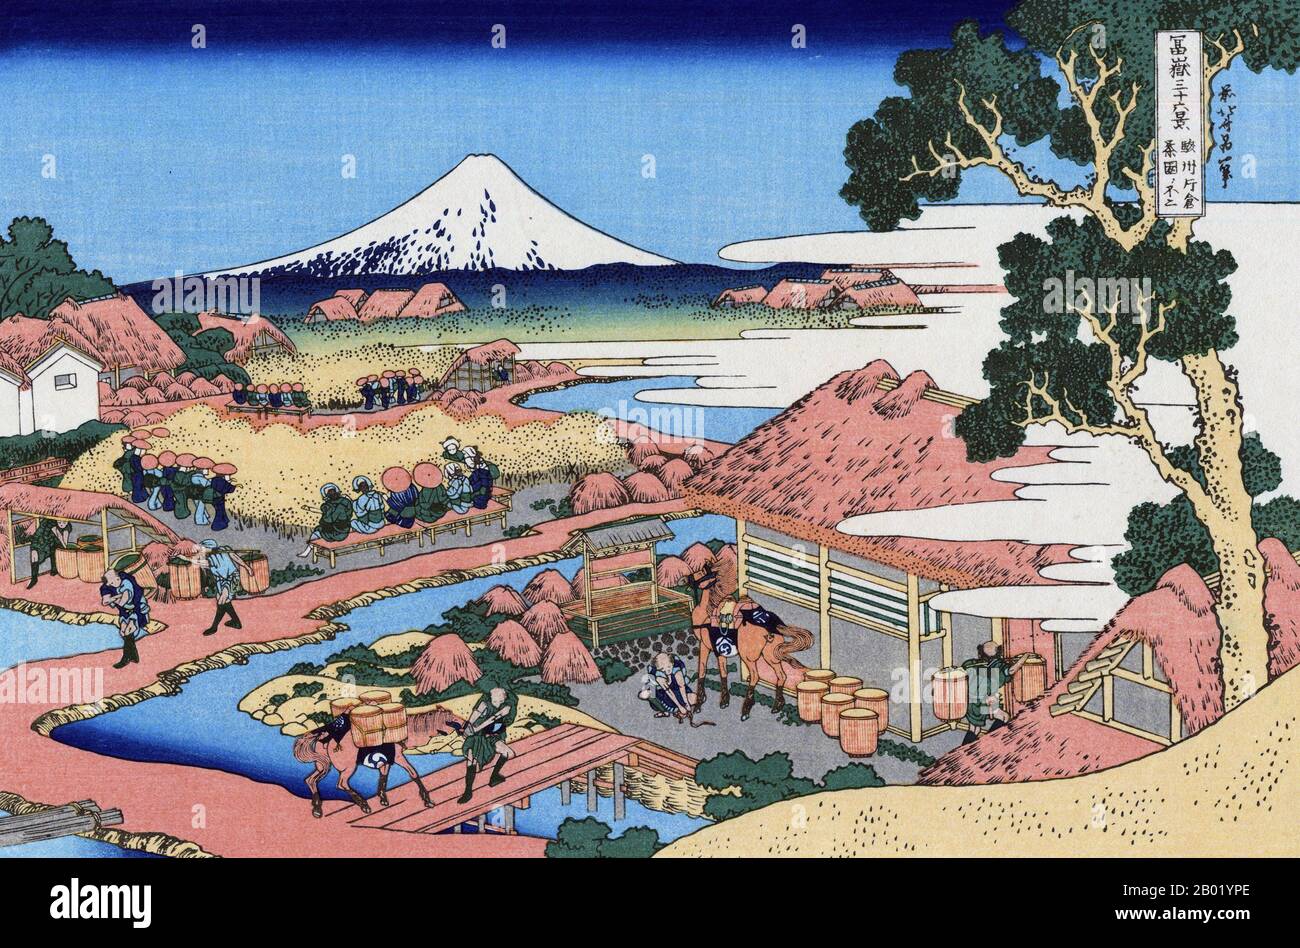 ‘Thirty-six Views of Mount Fuji’ is an ‘ukiyo-e’ series of large, color woodblock prints by the Japanese artist Katsushika Hokusai (1760–1849). The series depicts Mount Fuji in differing seasons and weather conditions from a variety of places and distances.  It actually consists of 46 prints created between 1826 and 1833. The first 36 were included in the original publication and, due to their popularity, 10 more were added after the original publication.  Mount Fuji is the highest mountain in Japan at 3,776 m (12,389 ft). An active stratovolcano that last erupted in 1707–08, Mount Fuji lies a Stock Photo